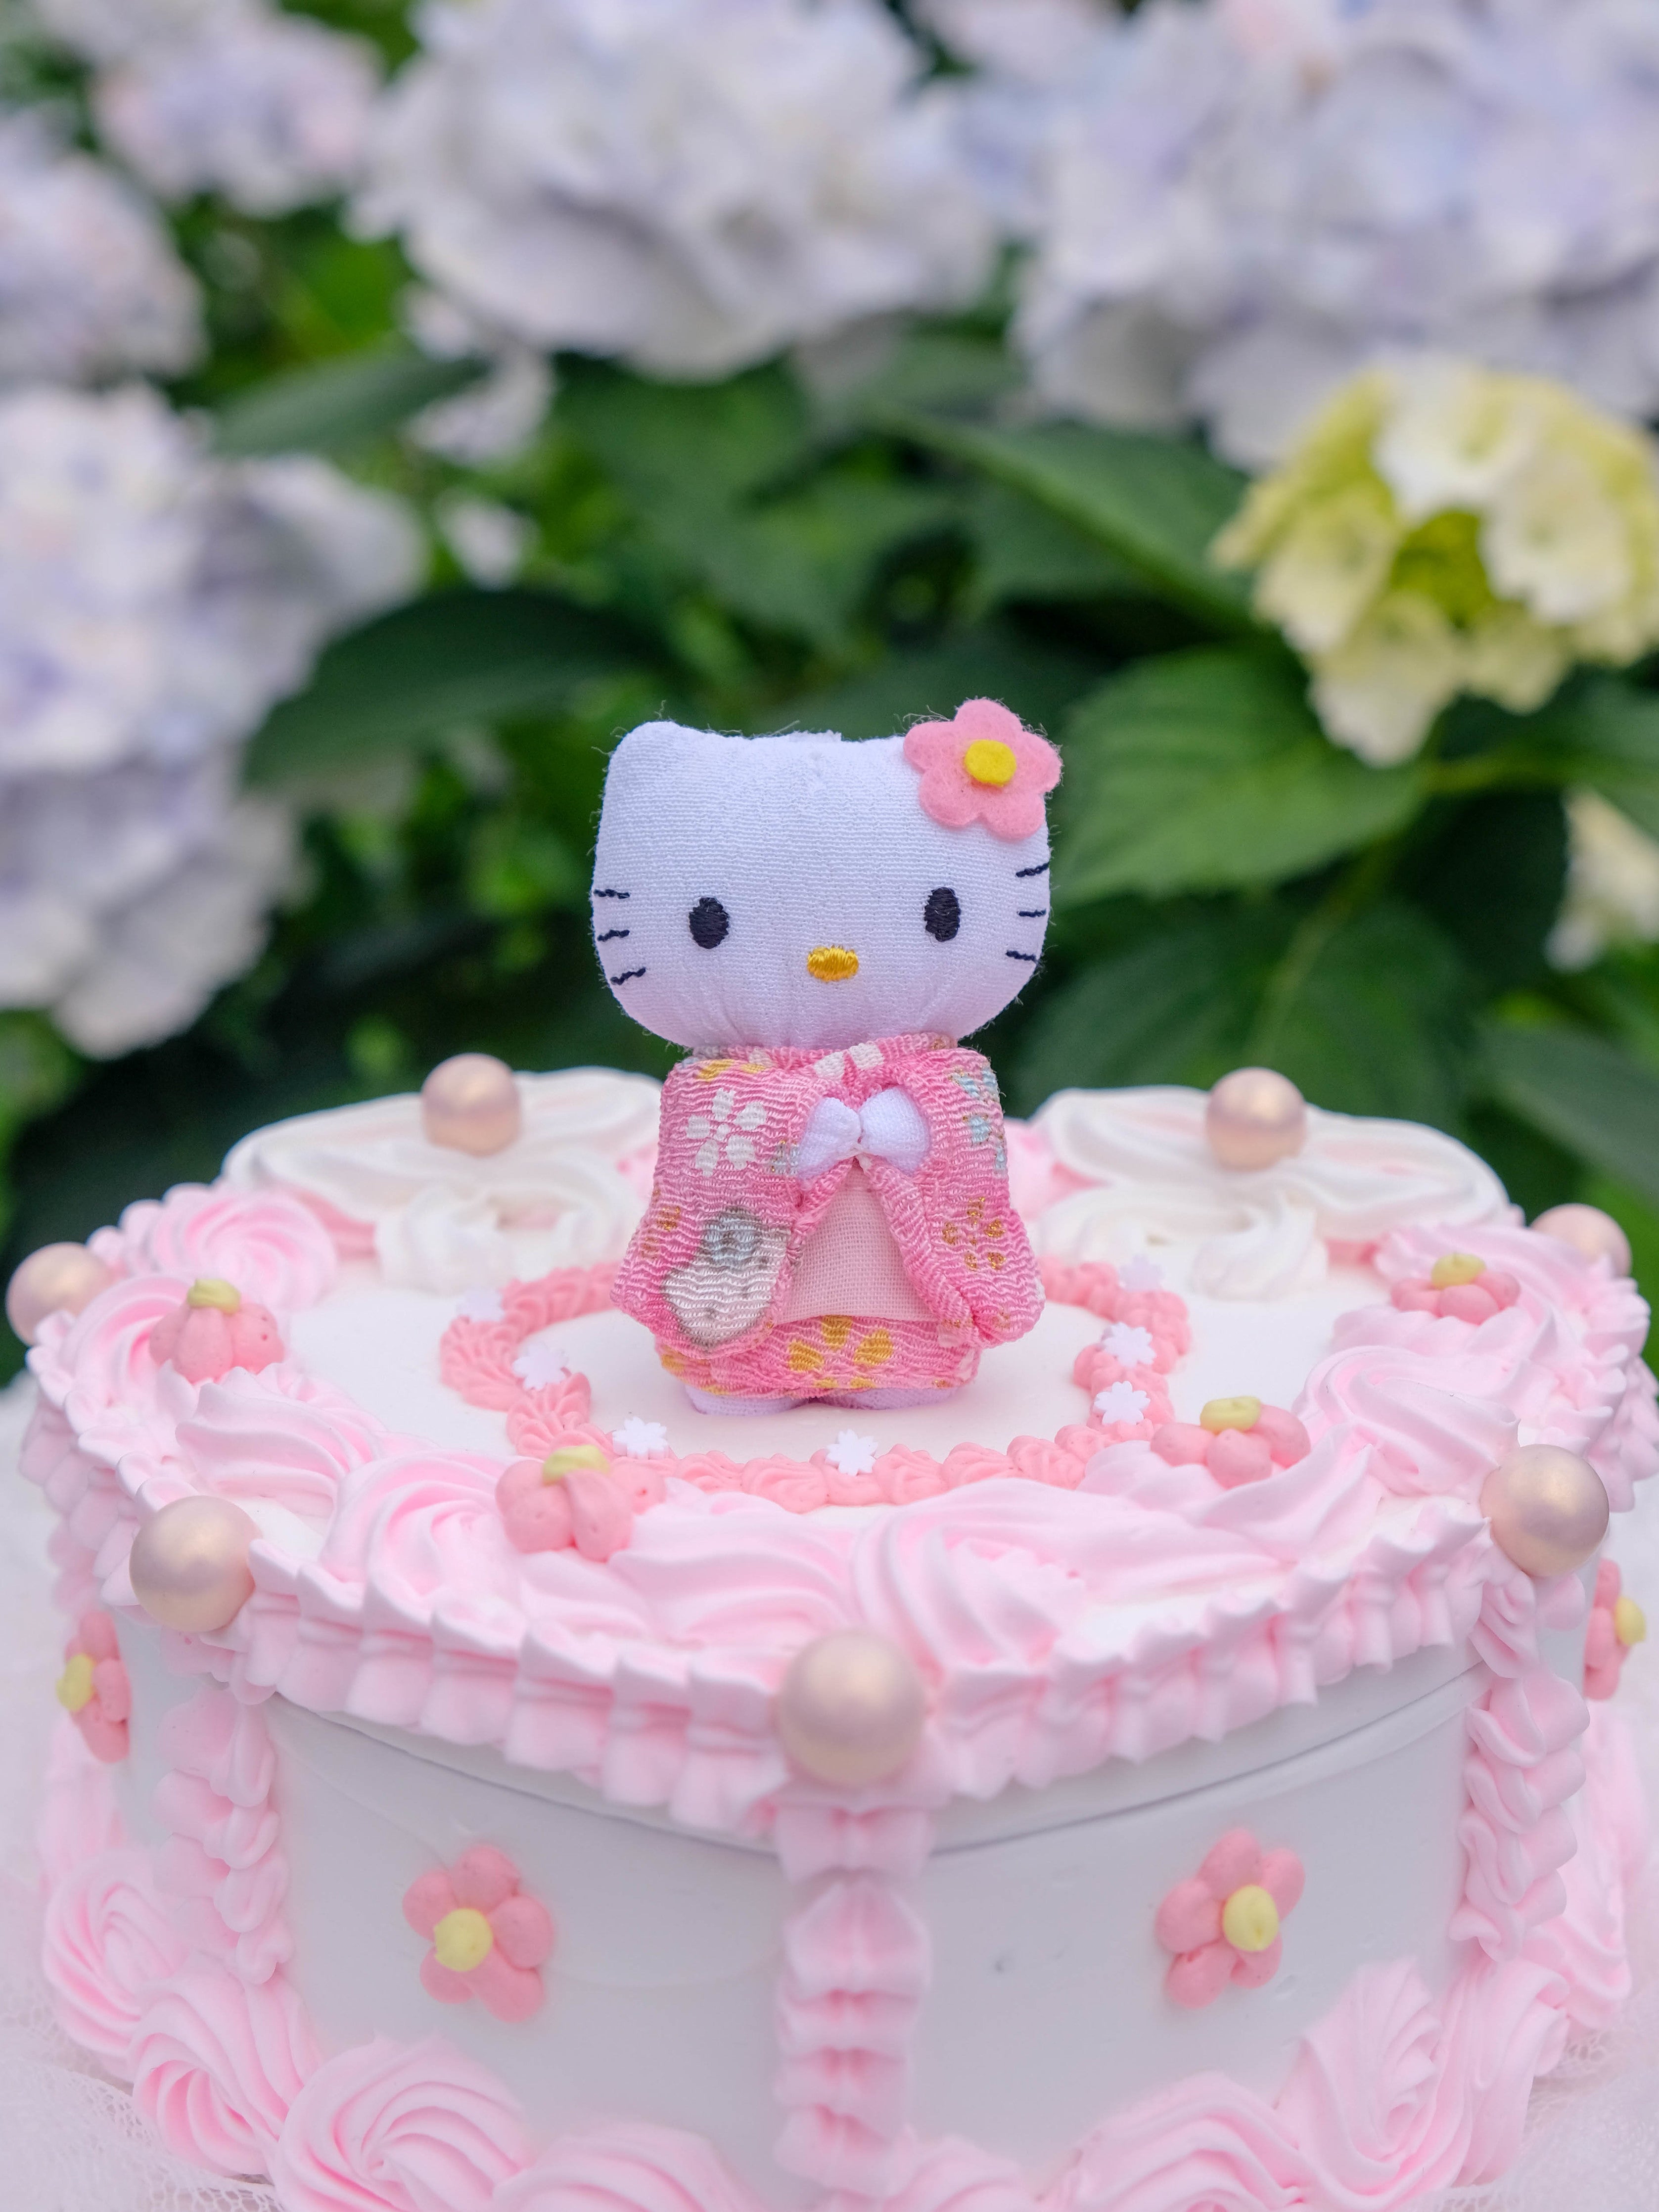 Pin by kylie:) on yummy | Hello kitty birthday cake, Hello kitty cake,  Hello kitty birthday party